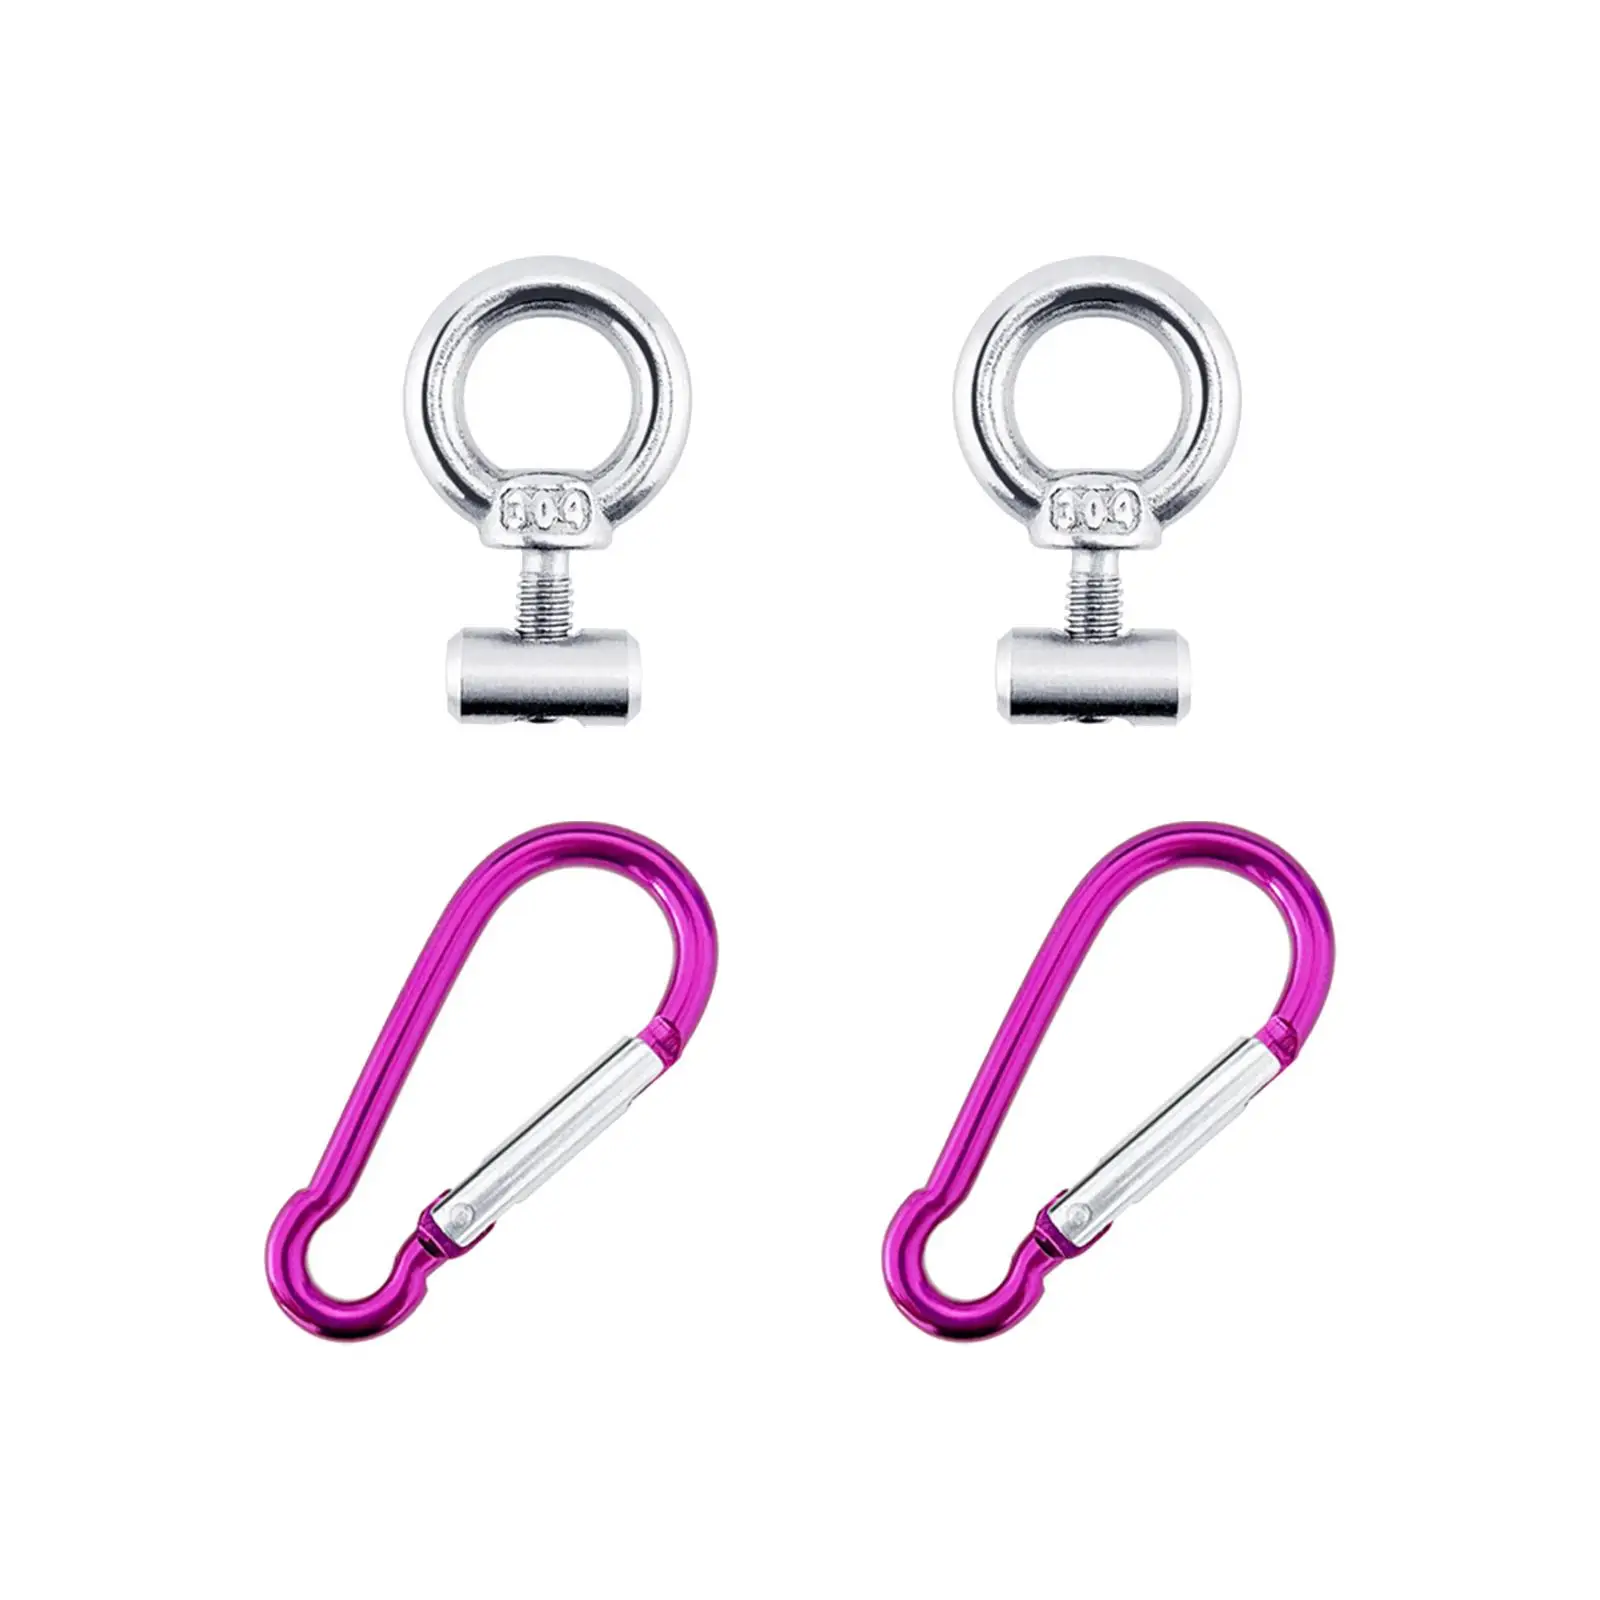 Carabiners Clips M4 Lifting Eye Nuts for Awning Rail Caravan Tie Down Eyelet